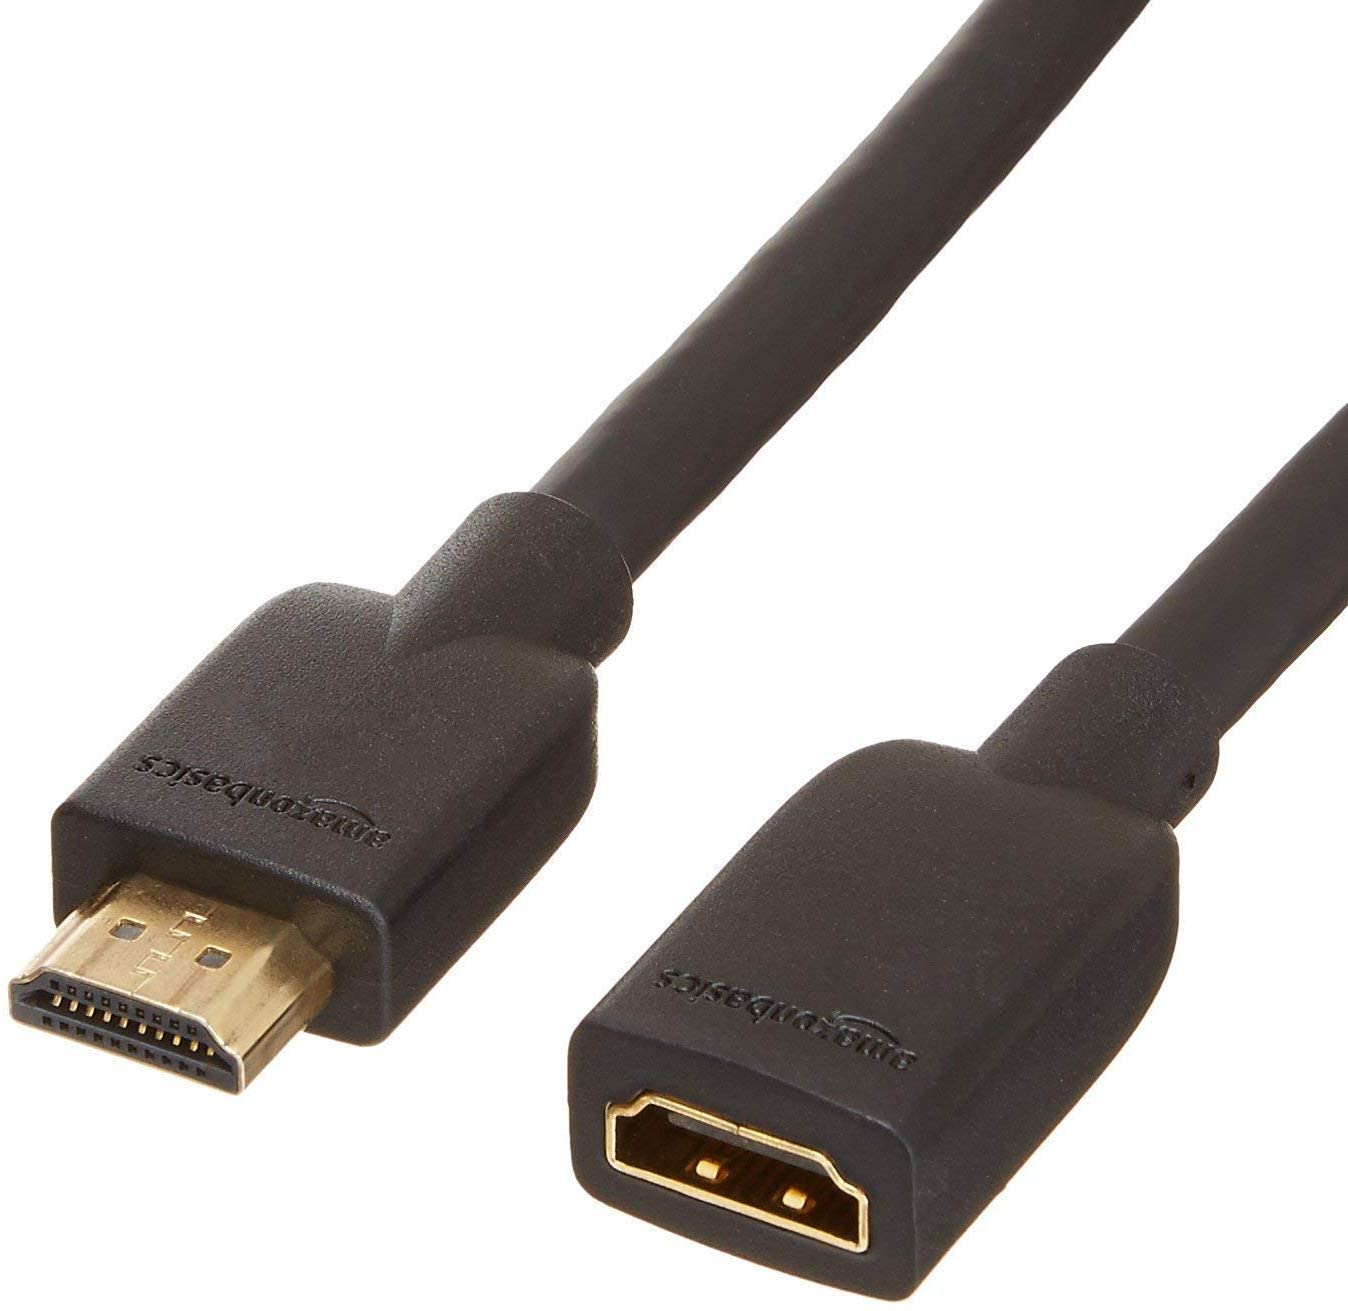 AmazonBasics Gold-Plated HDMI Extender Cable, 6-Foot